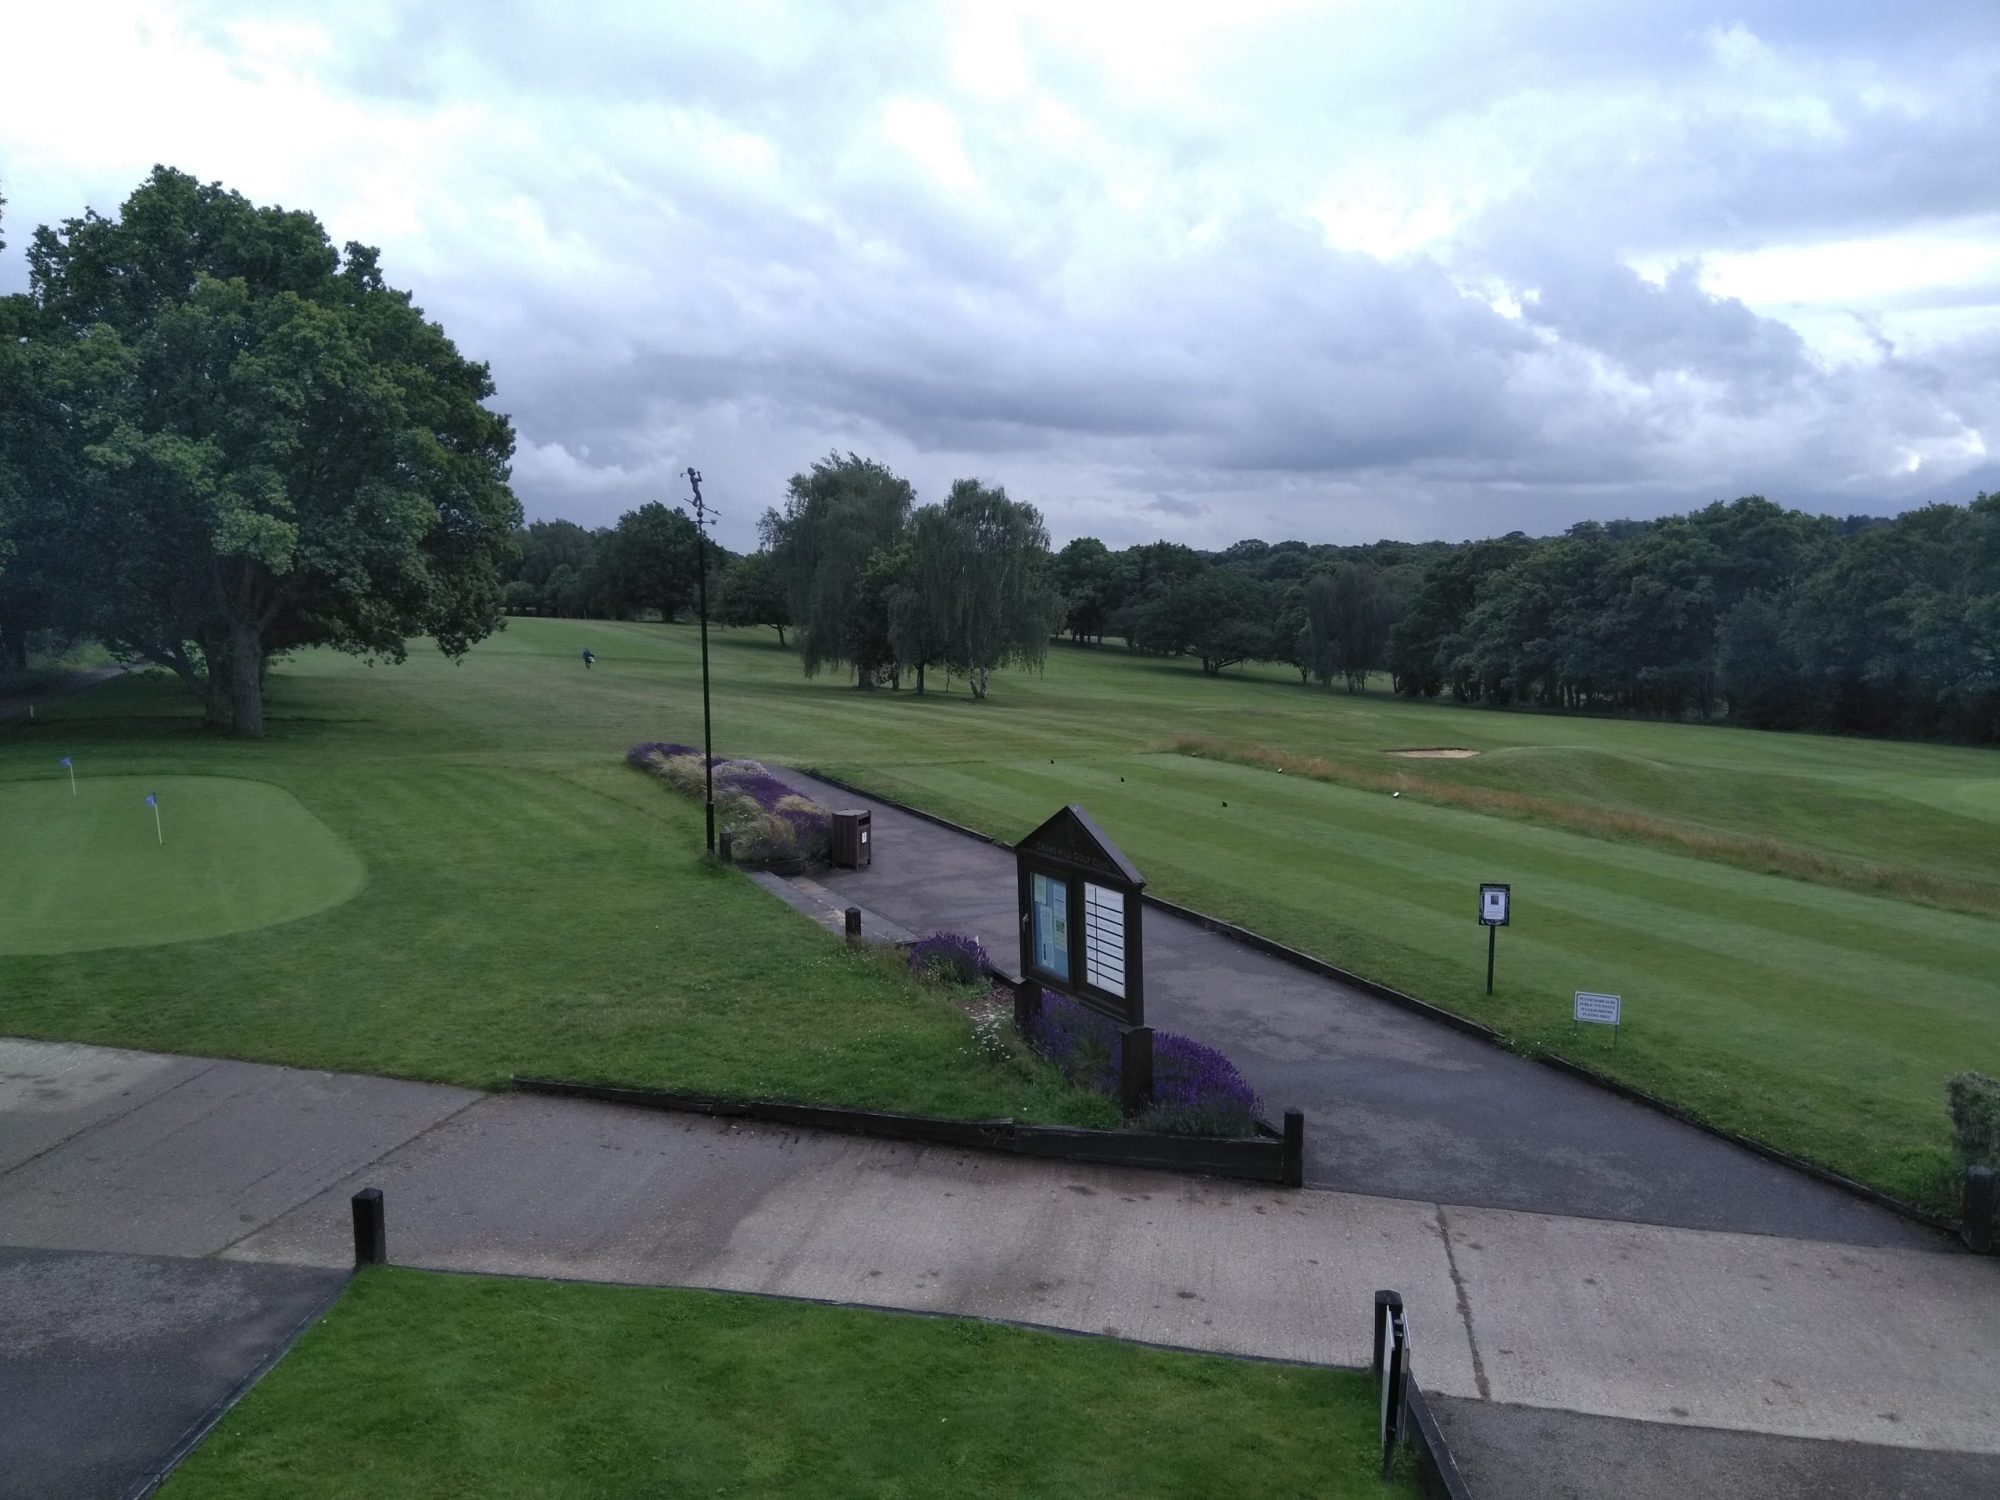 Crews Hill Golf Club is one of the council-owned Green Belt sites earmarked for housing development in its draft Local Plan